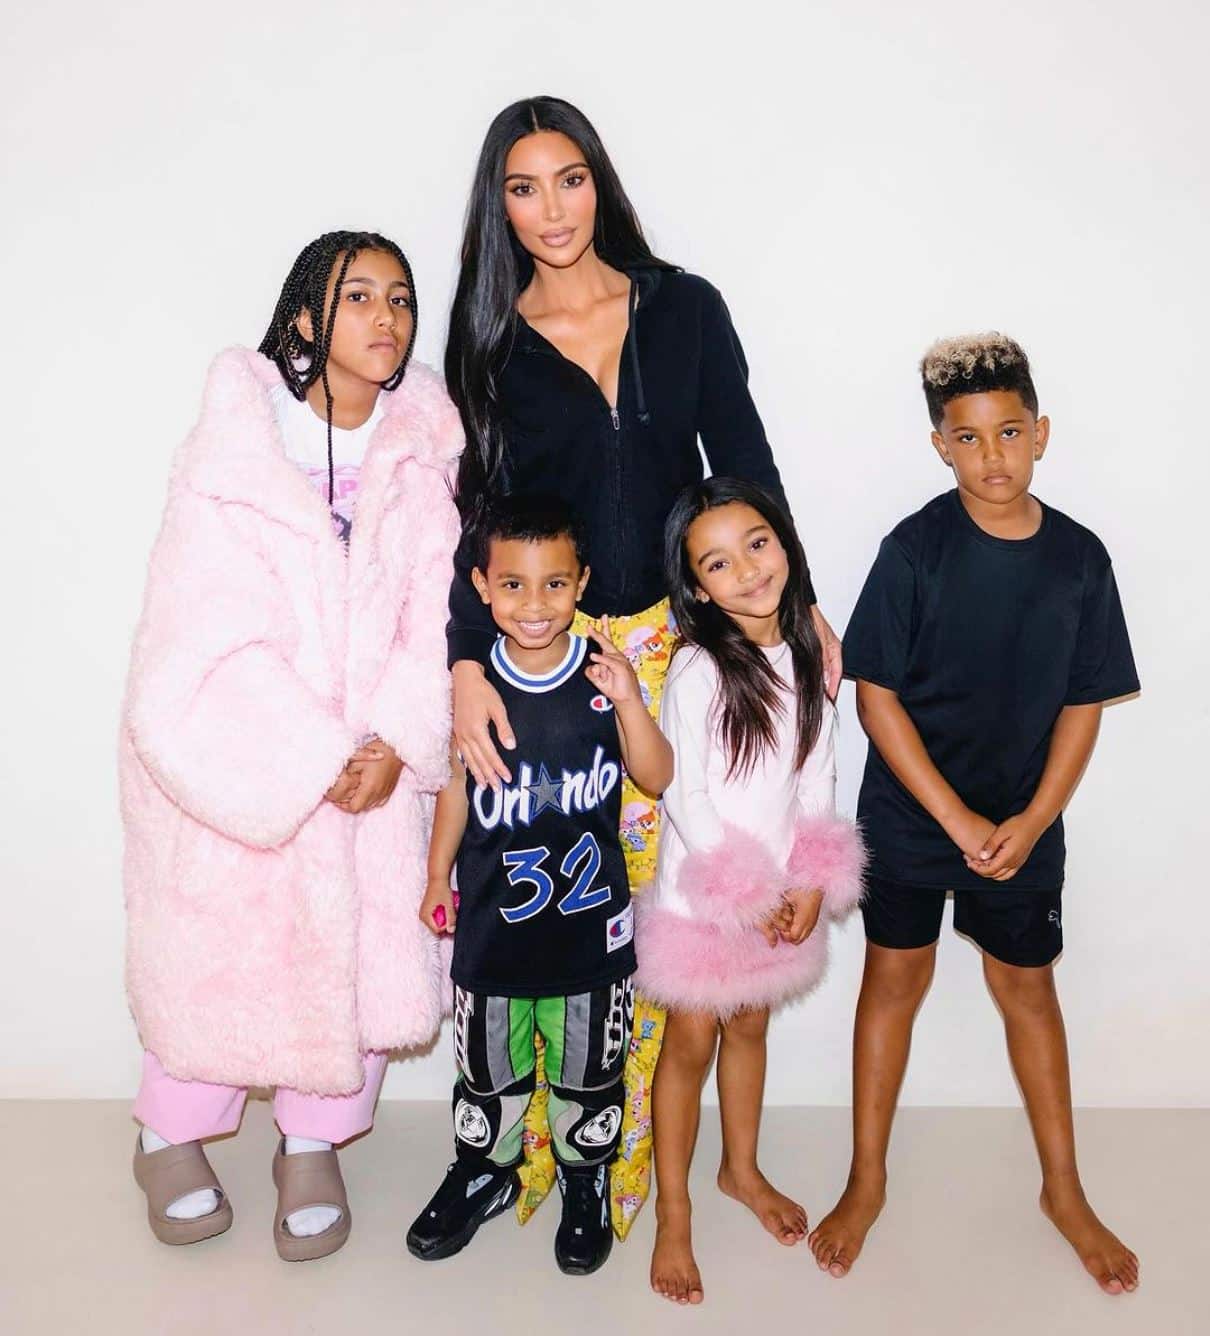 Kim Kardashian Admits Her Kids Are "Out of Control," Says She Hides in Bathroom to Escape Chaos of Raising Four Kids